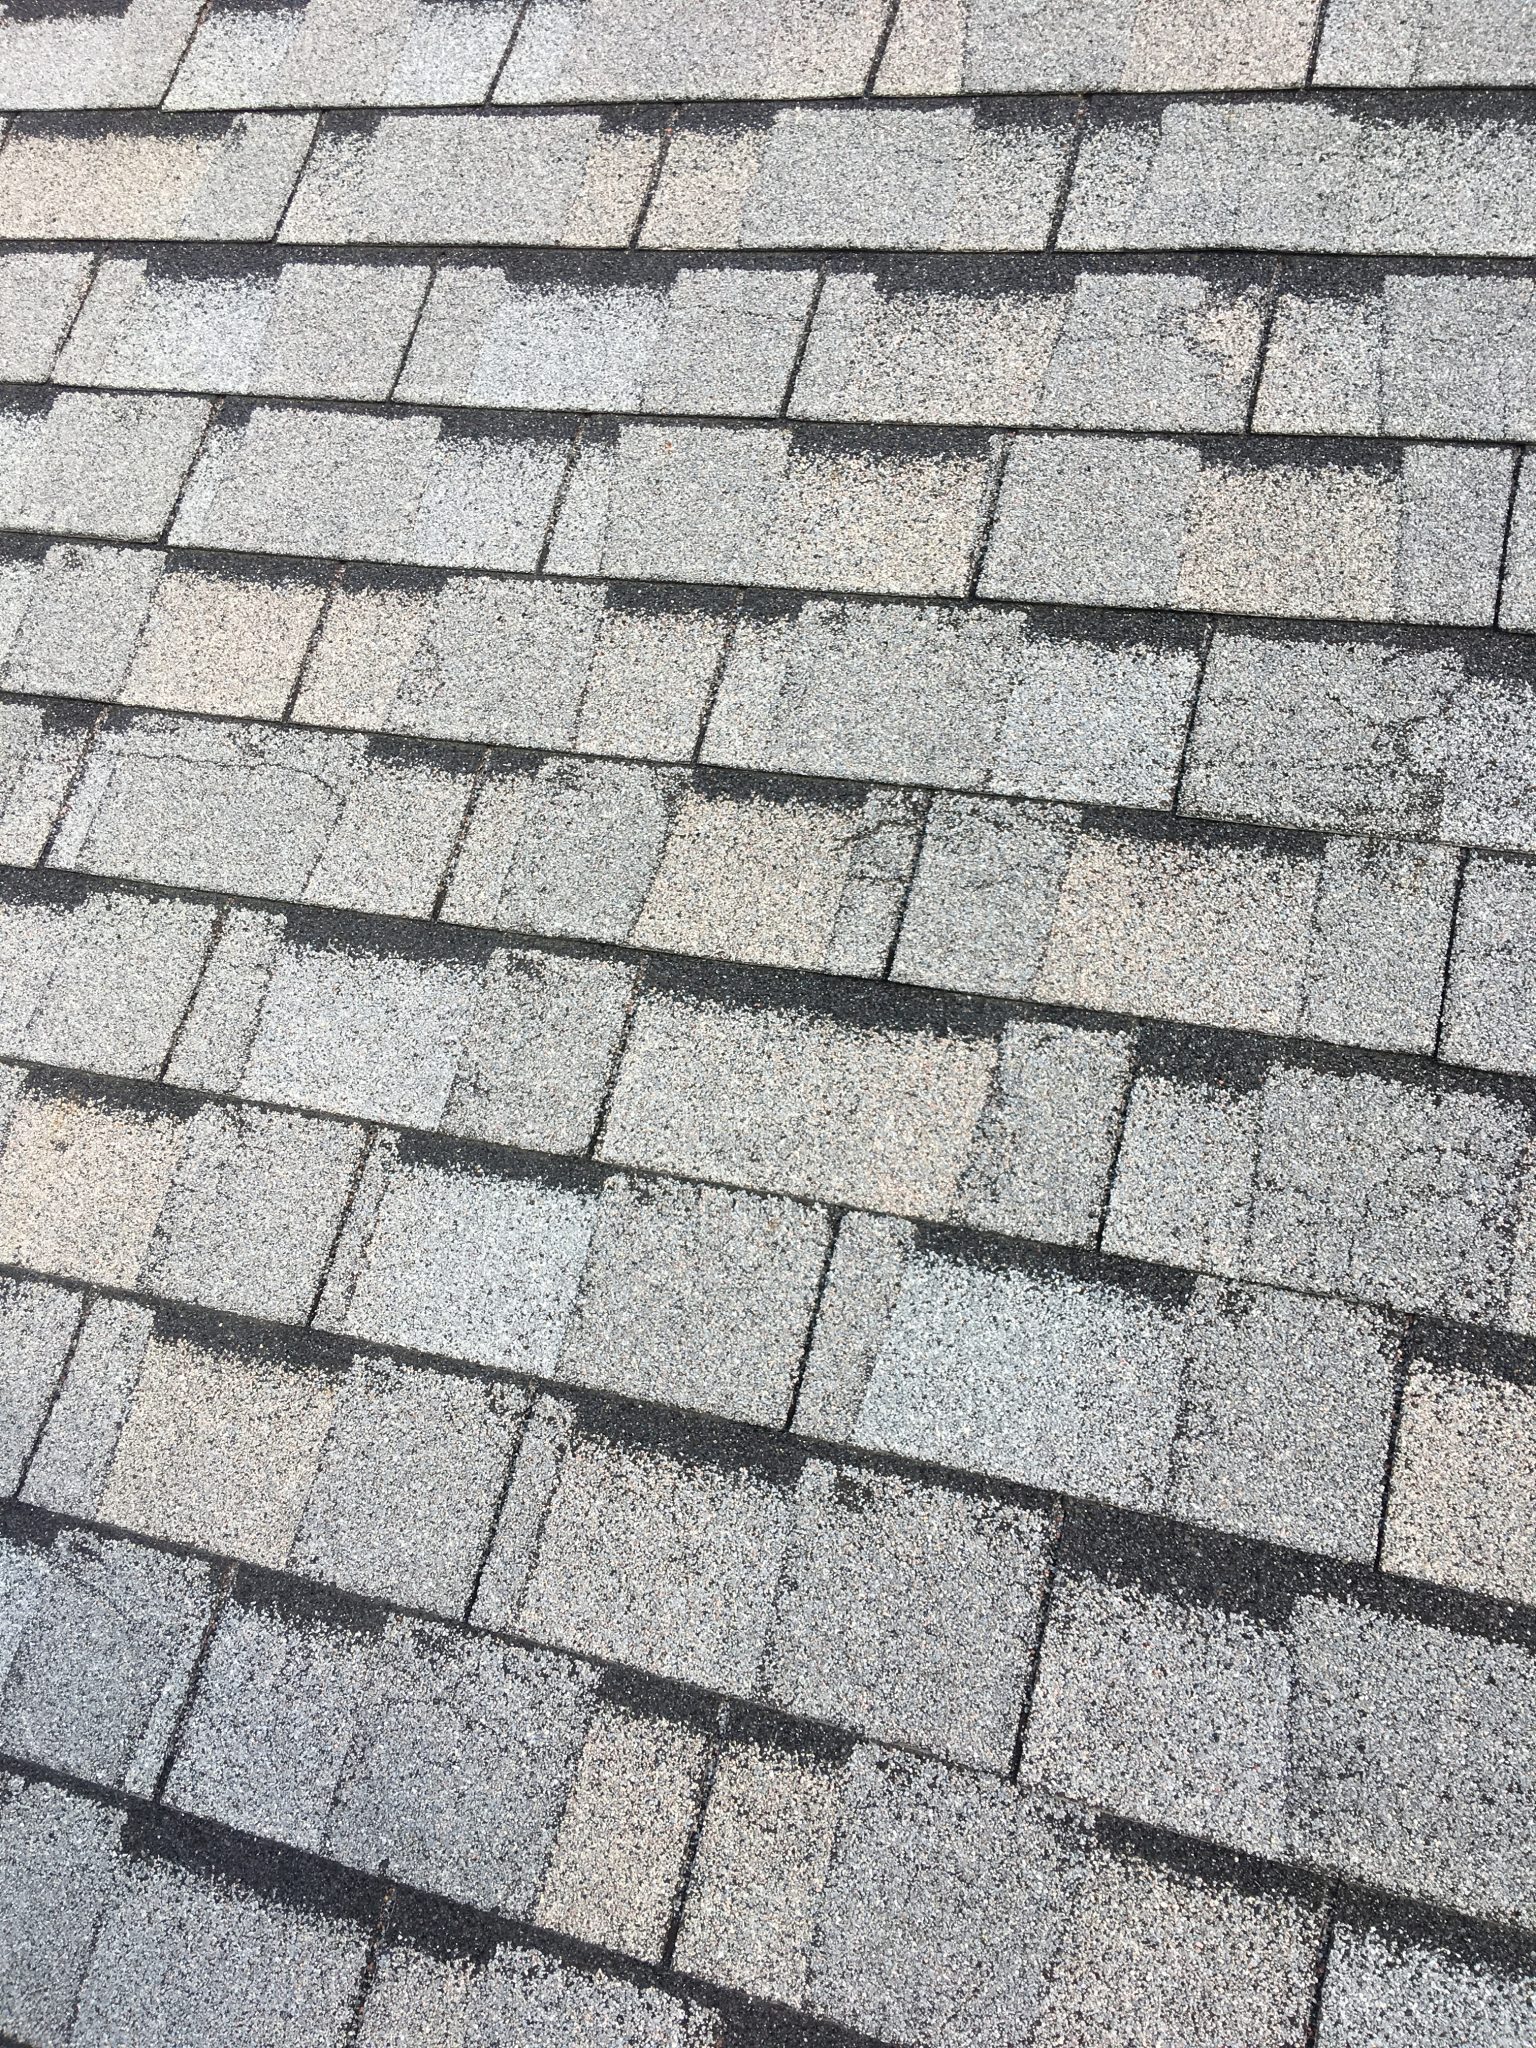 Defective Laminated 3 Tab Shingles Litespeed Construction Knoxville